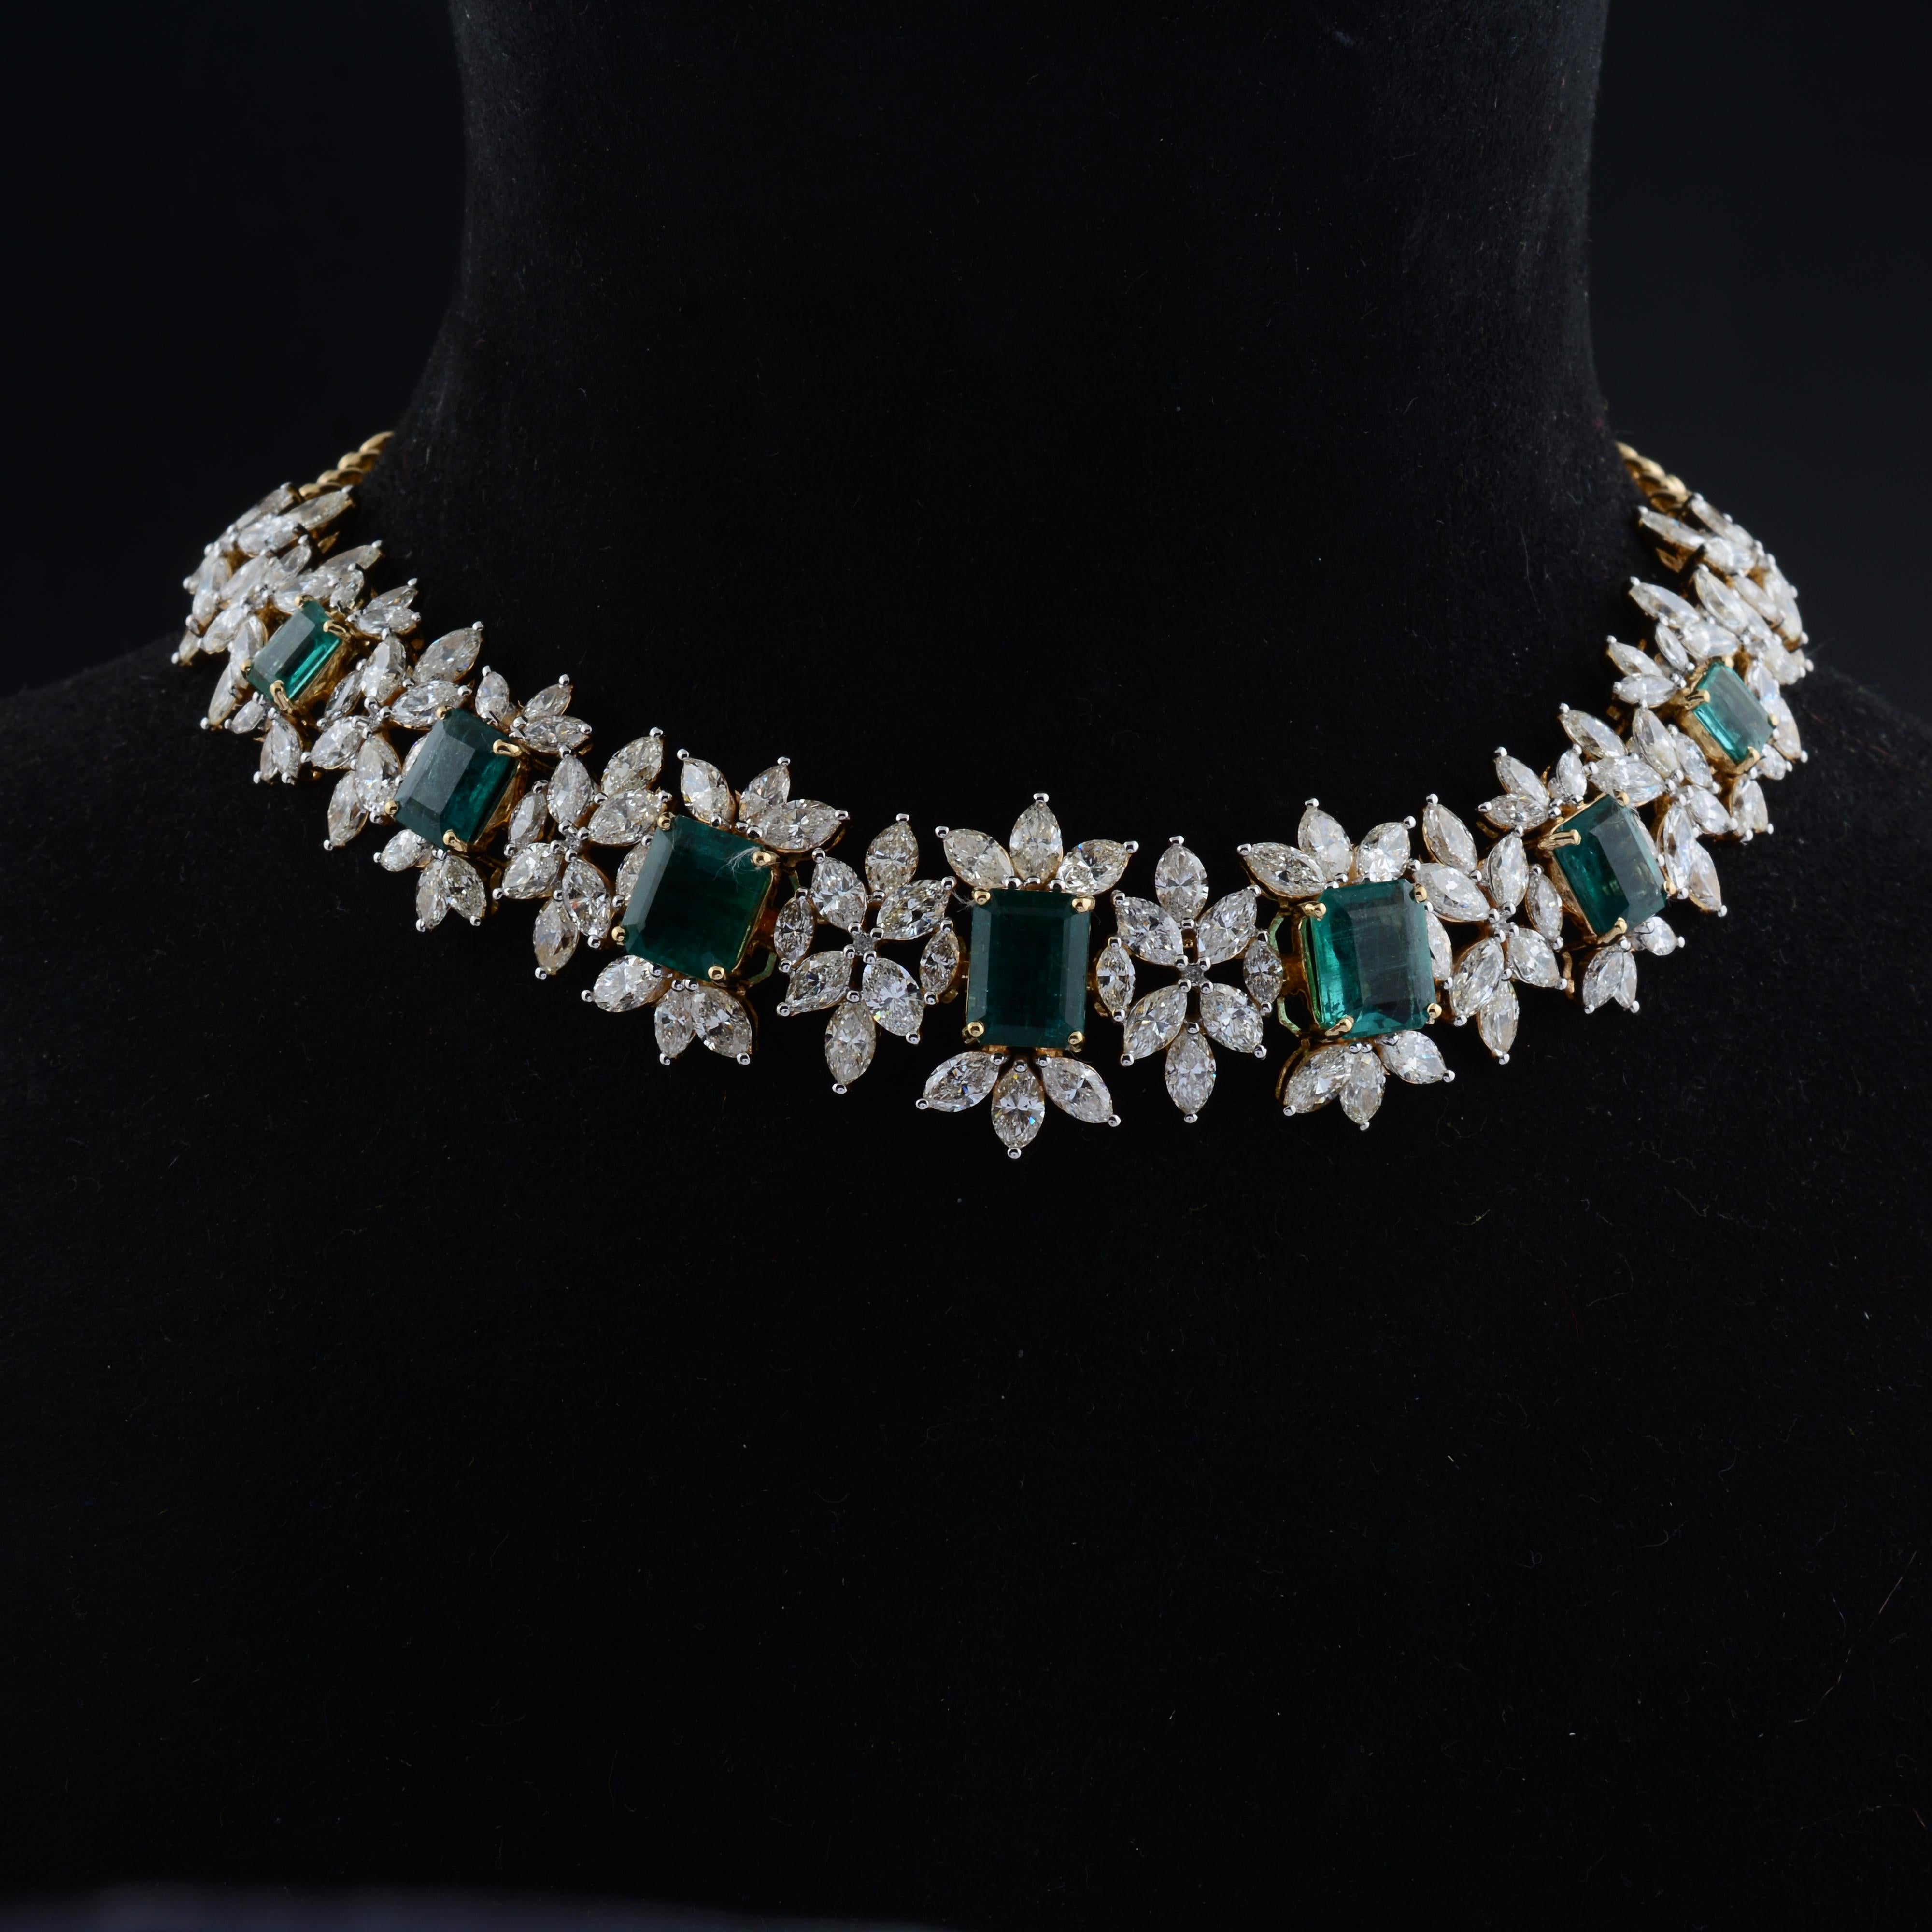 The focal point of this necklace is the natural emerald gemstone. With its rich green hue and exceptional clarity, the emerald exudes a sense of elegance and natural allure. Each emerald is carefully selected for its vibrant color and unique